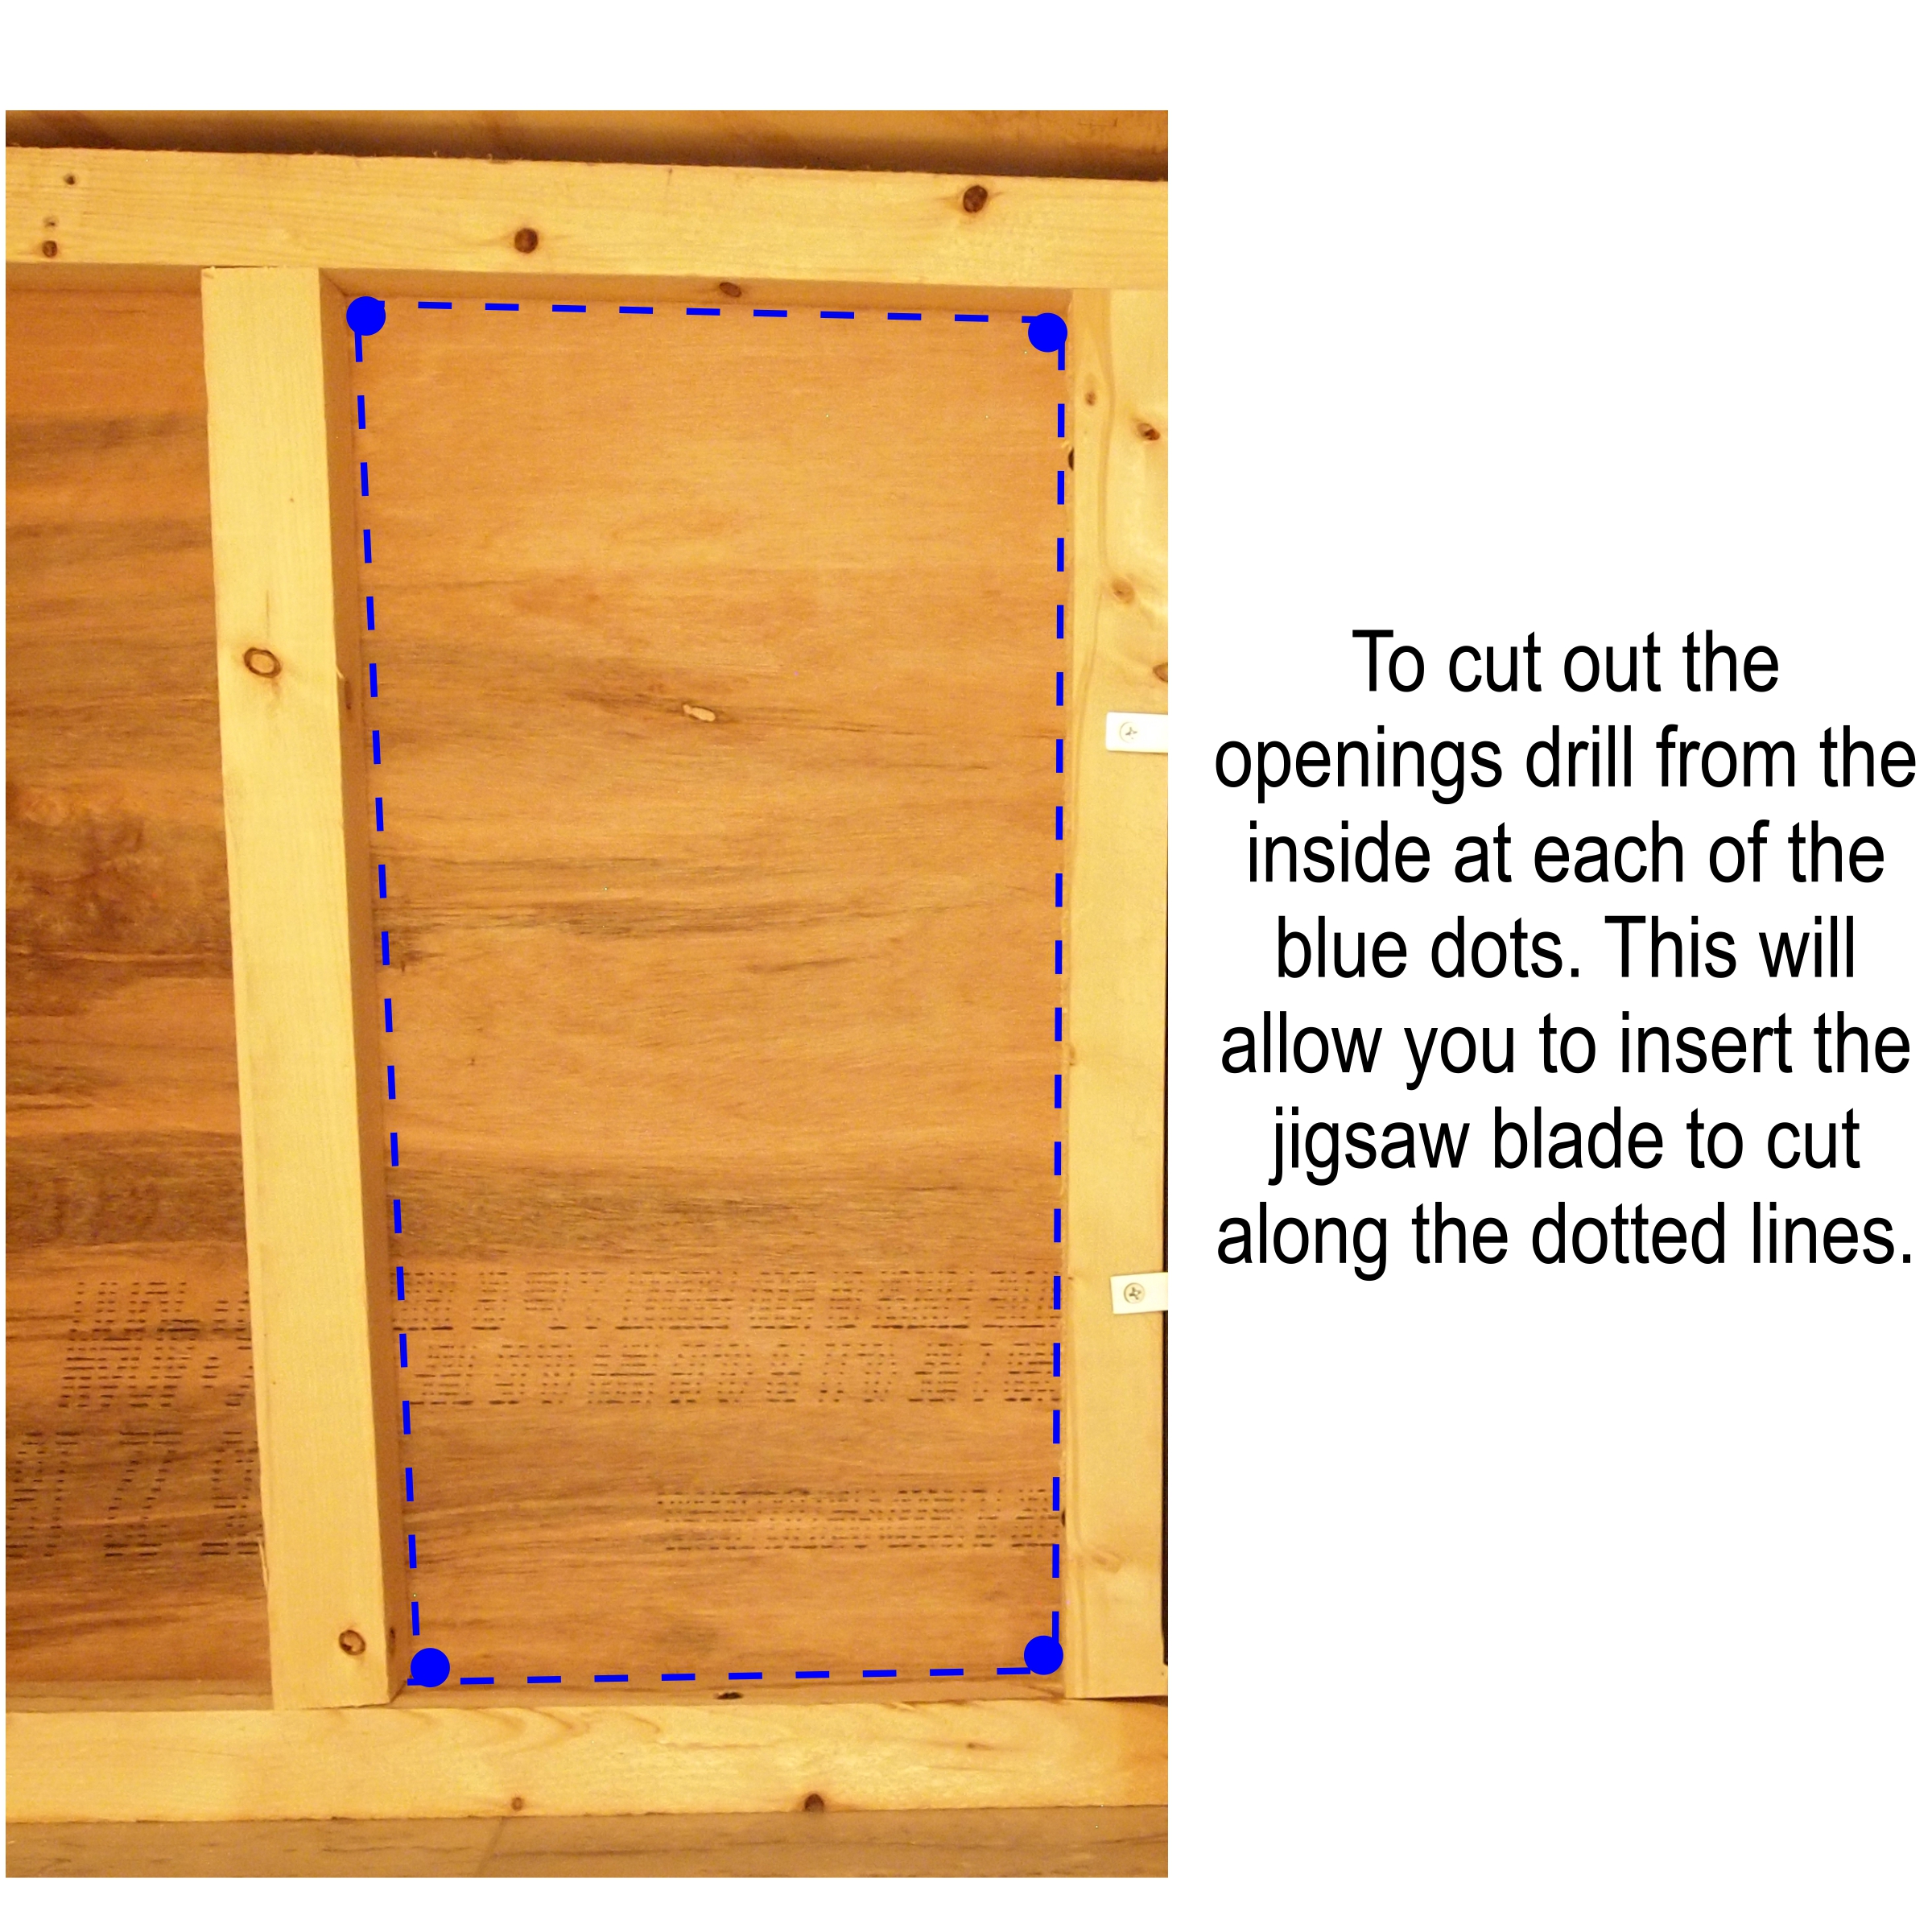 How to cut the openings